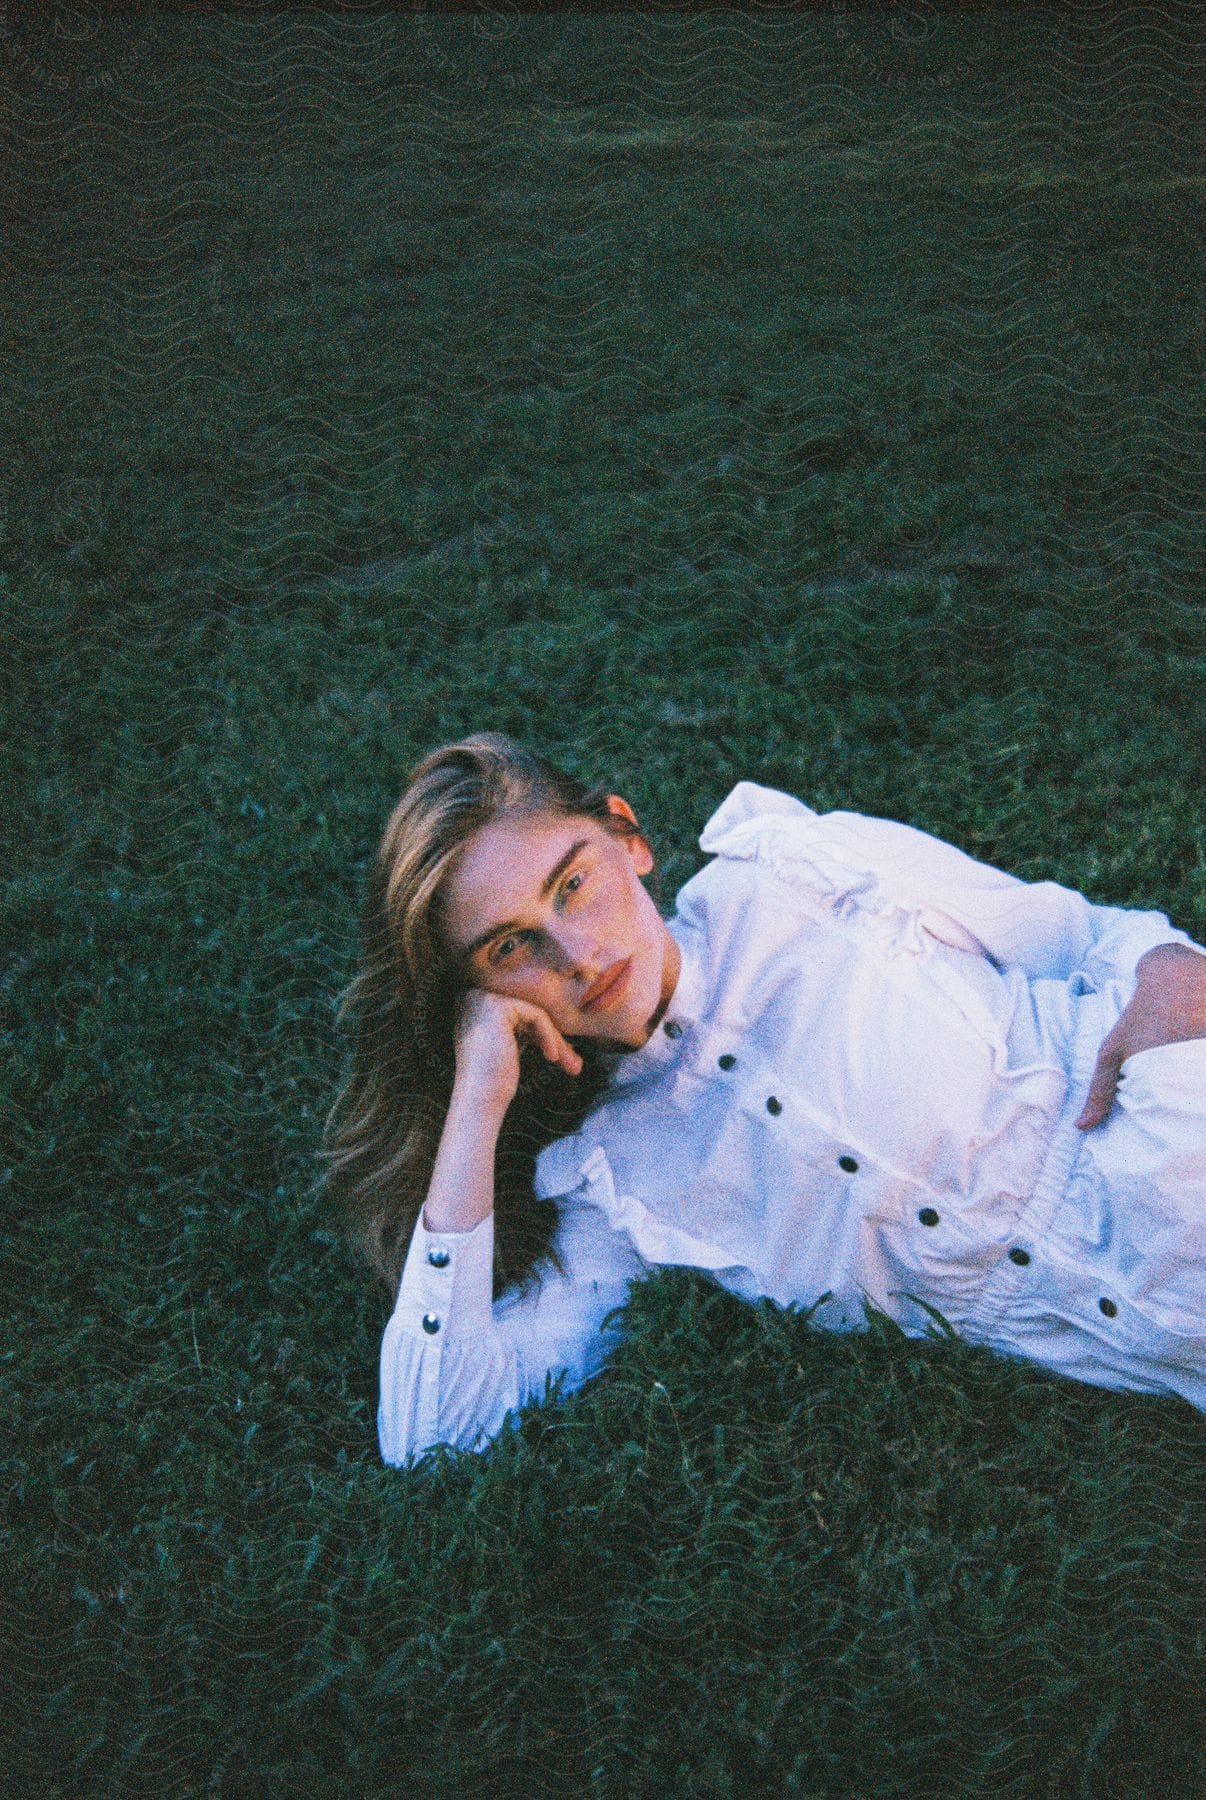 Blonde woman modeling in a white outfit, lying on the grass and resting her head on her hands.